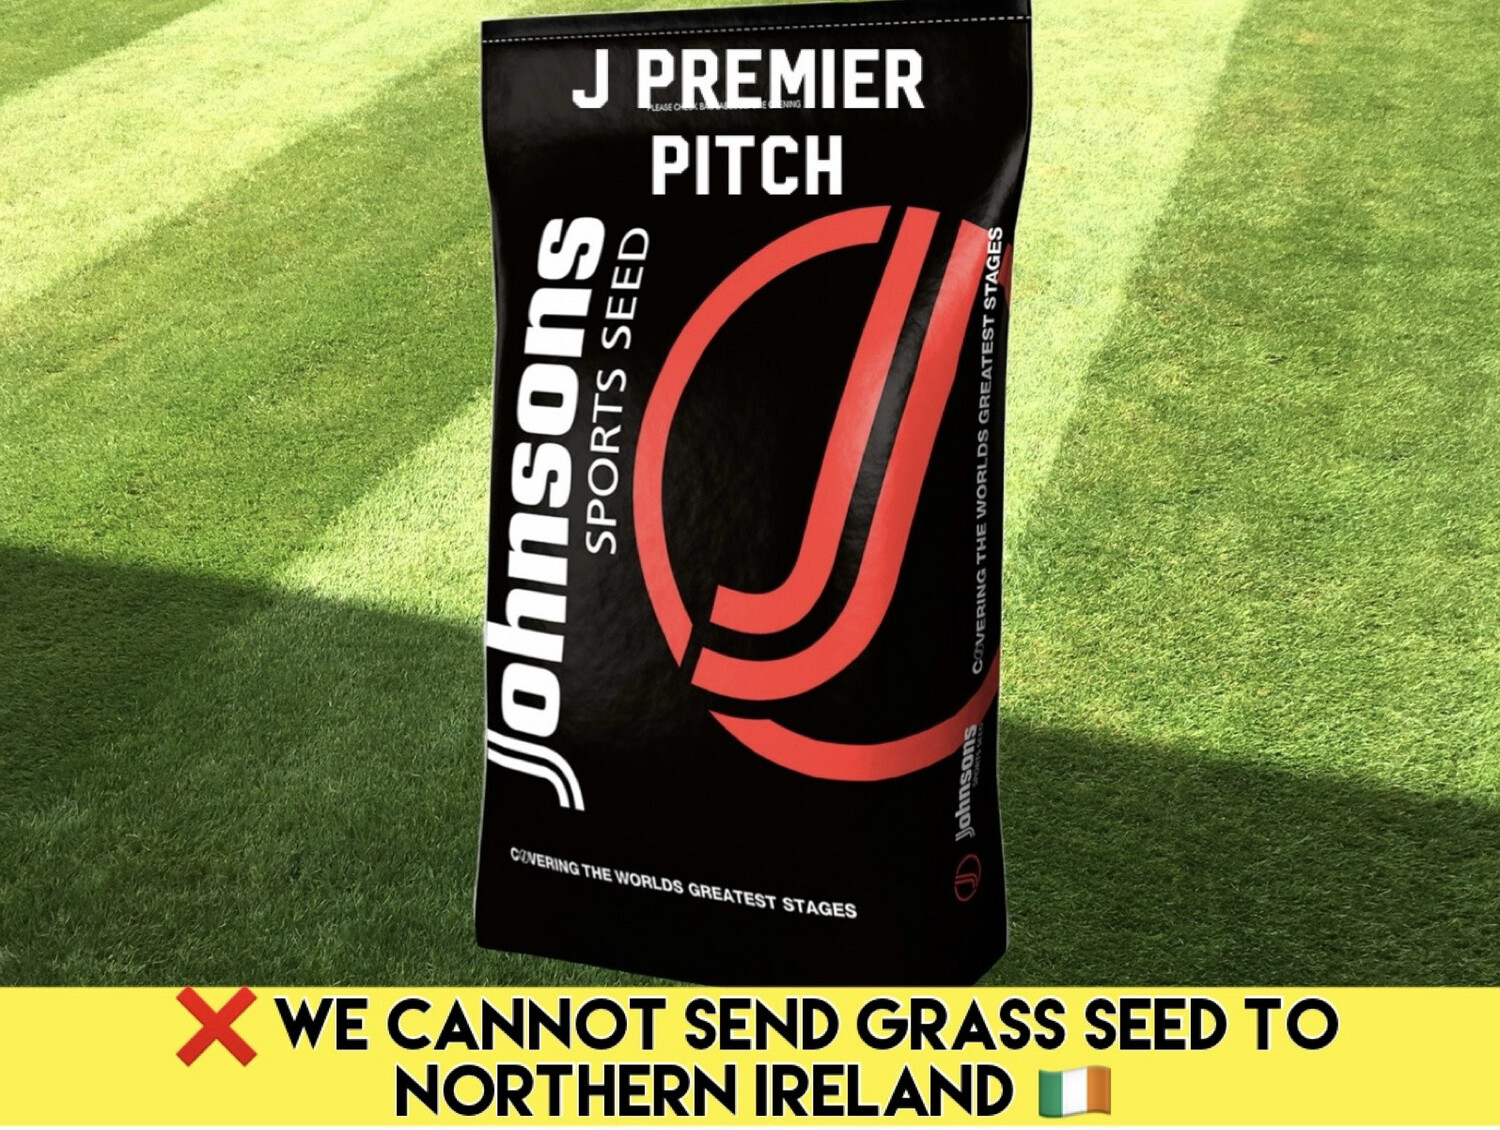 Johnsons J Premier Pitch Grass Seed - 2kg (Covers 80m2)